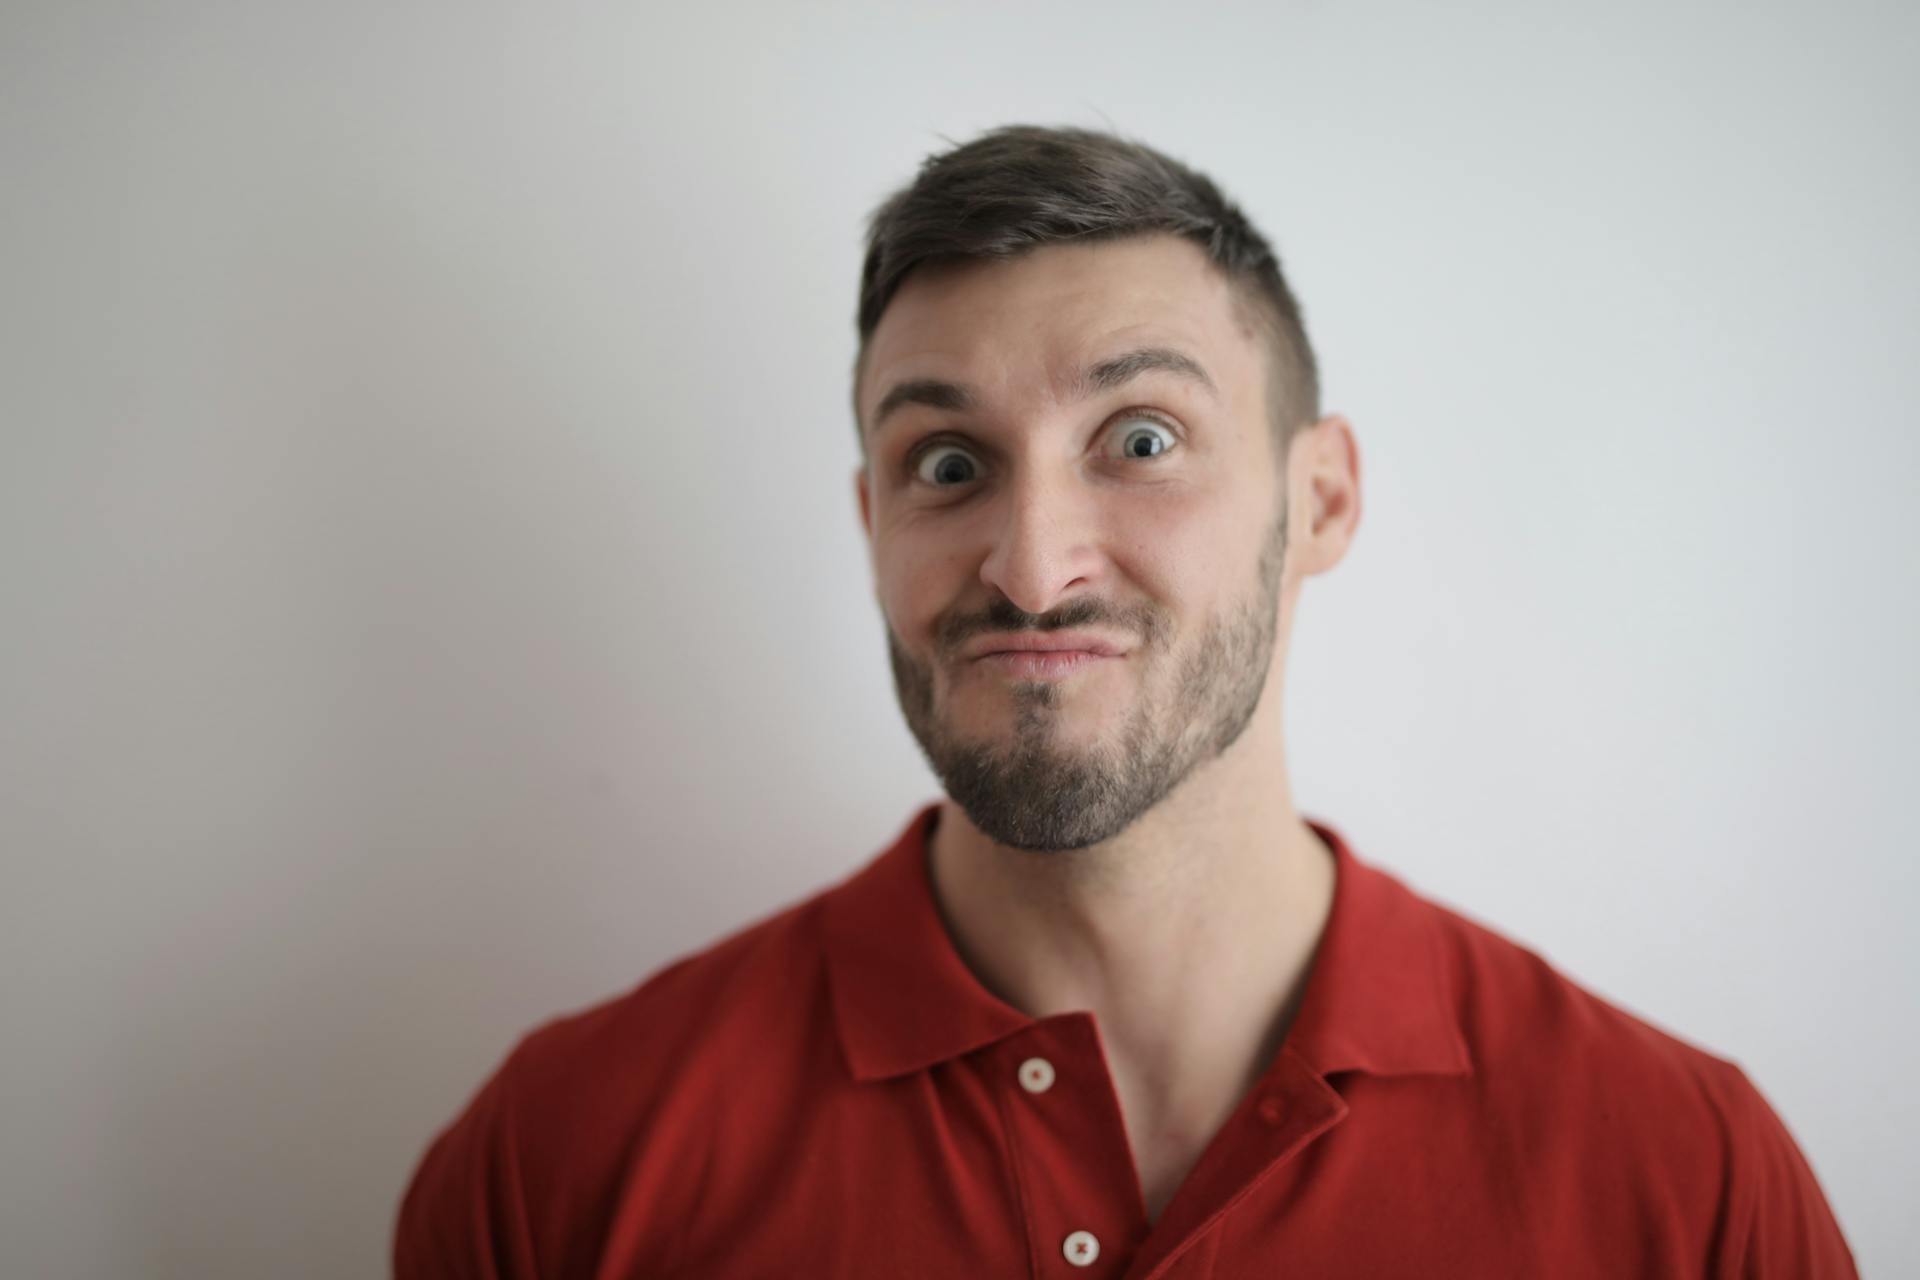 A surprised and embarrassed man | Source: Pexels